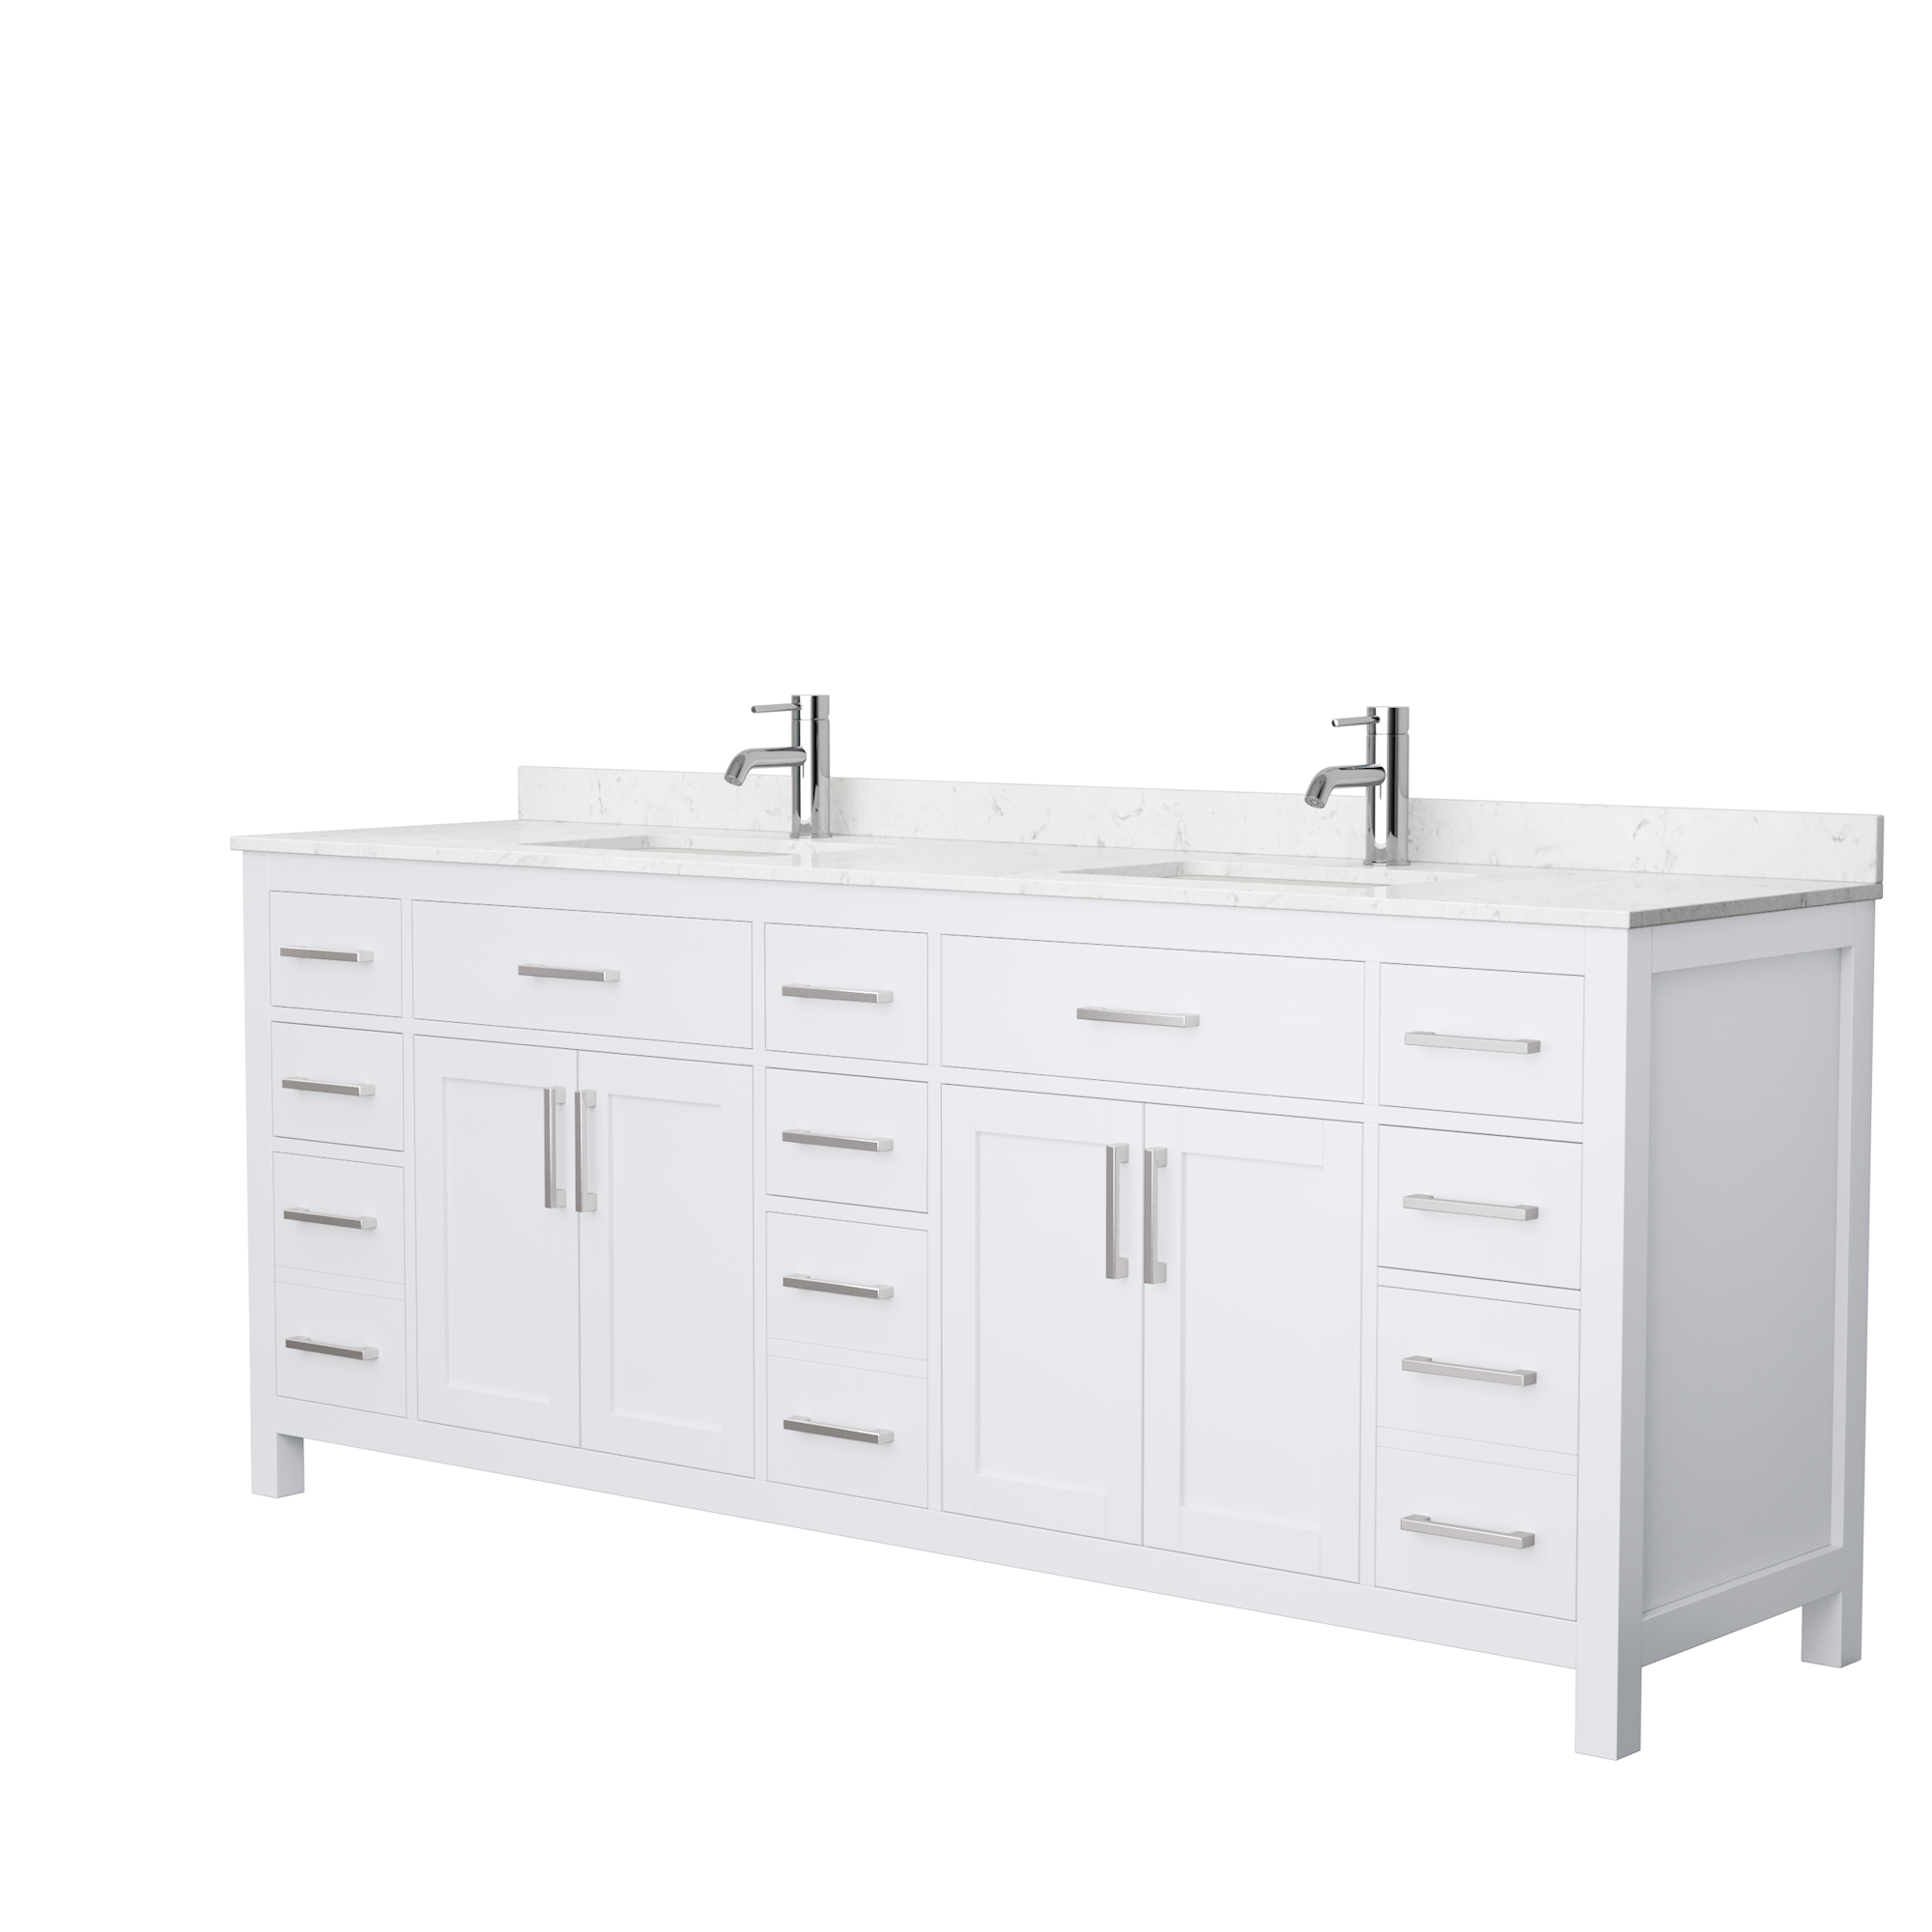 Beckett 84 Double Bathroom Vanity White Beautiful Bathroom Furniture For Every Home Wyndham Collection